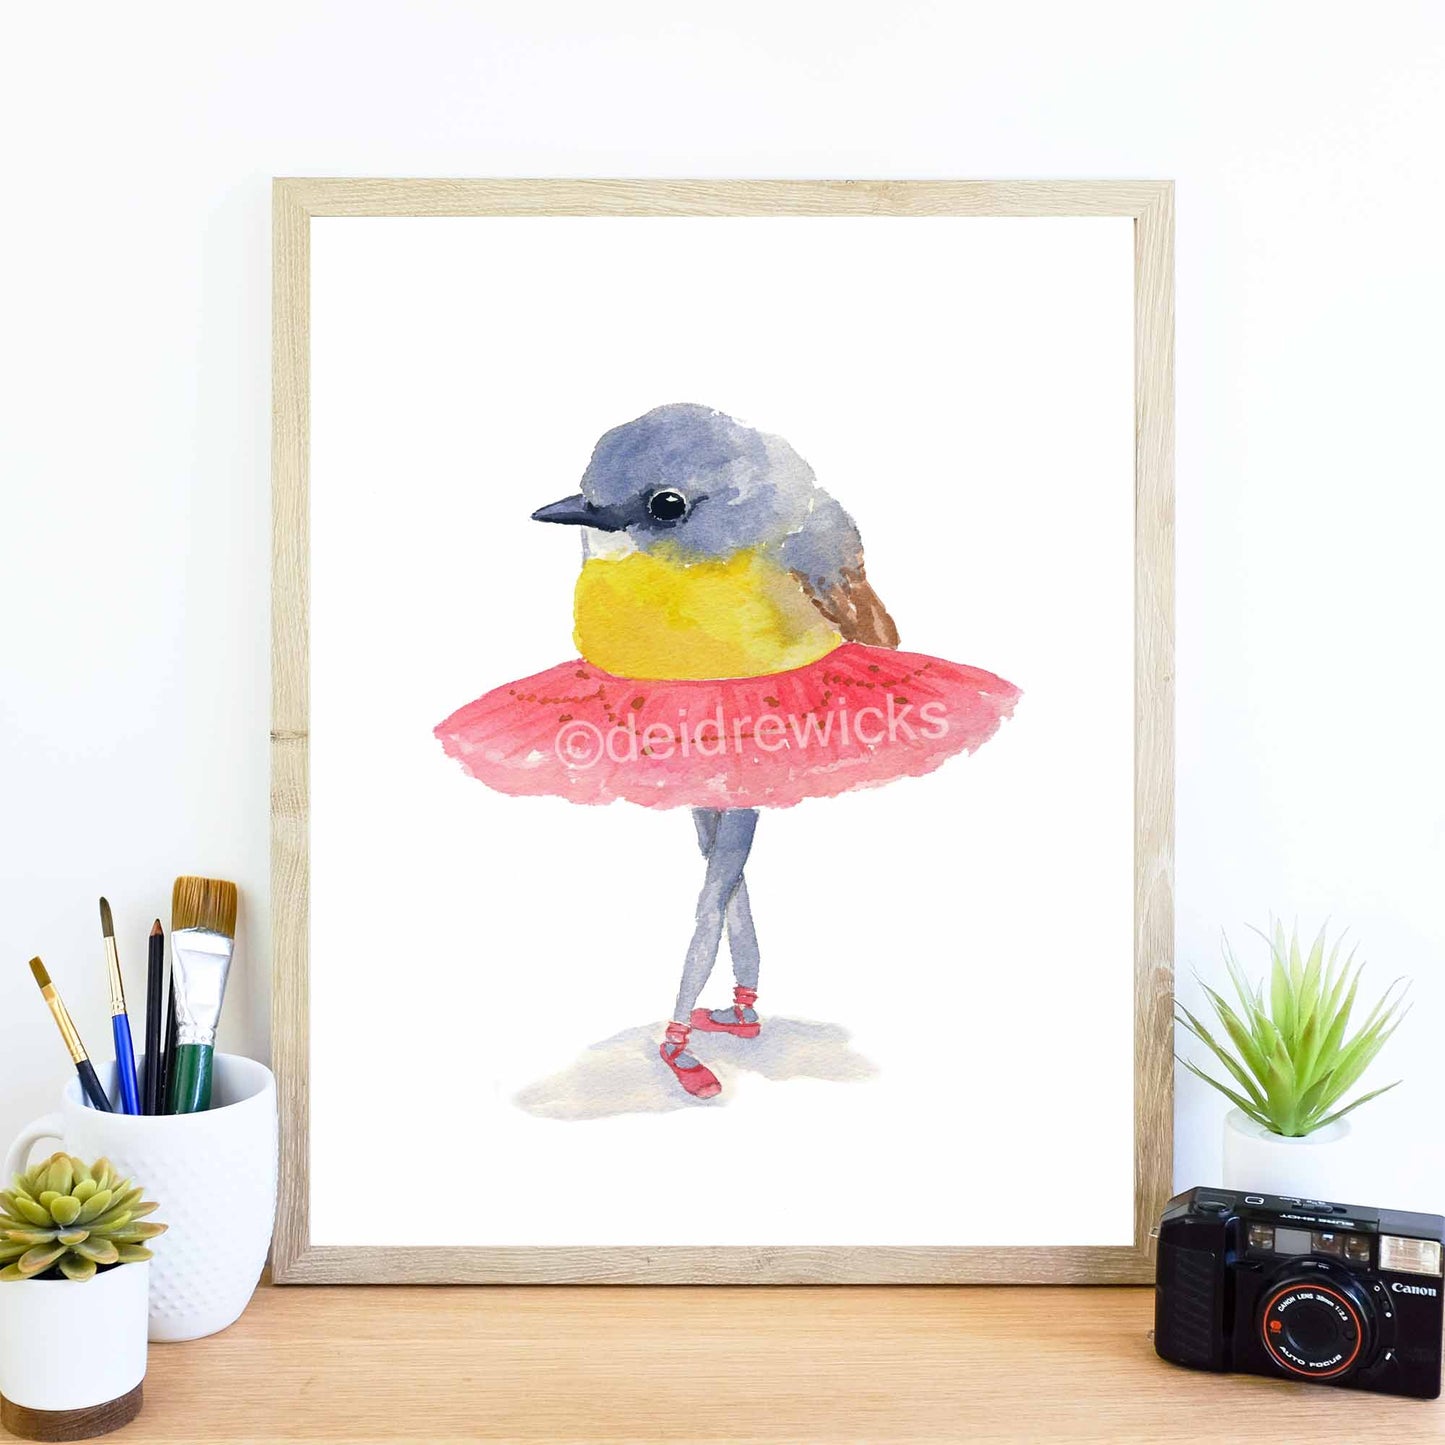 Framed example of a watercolour paining of a robin bird wearing a tutu